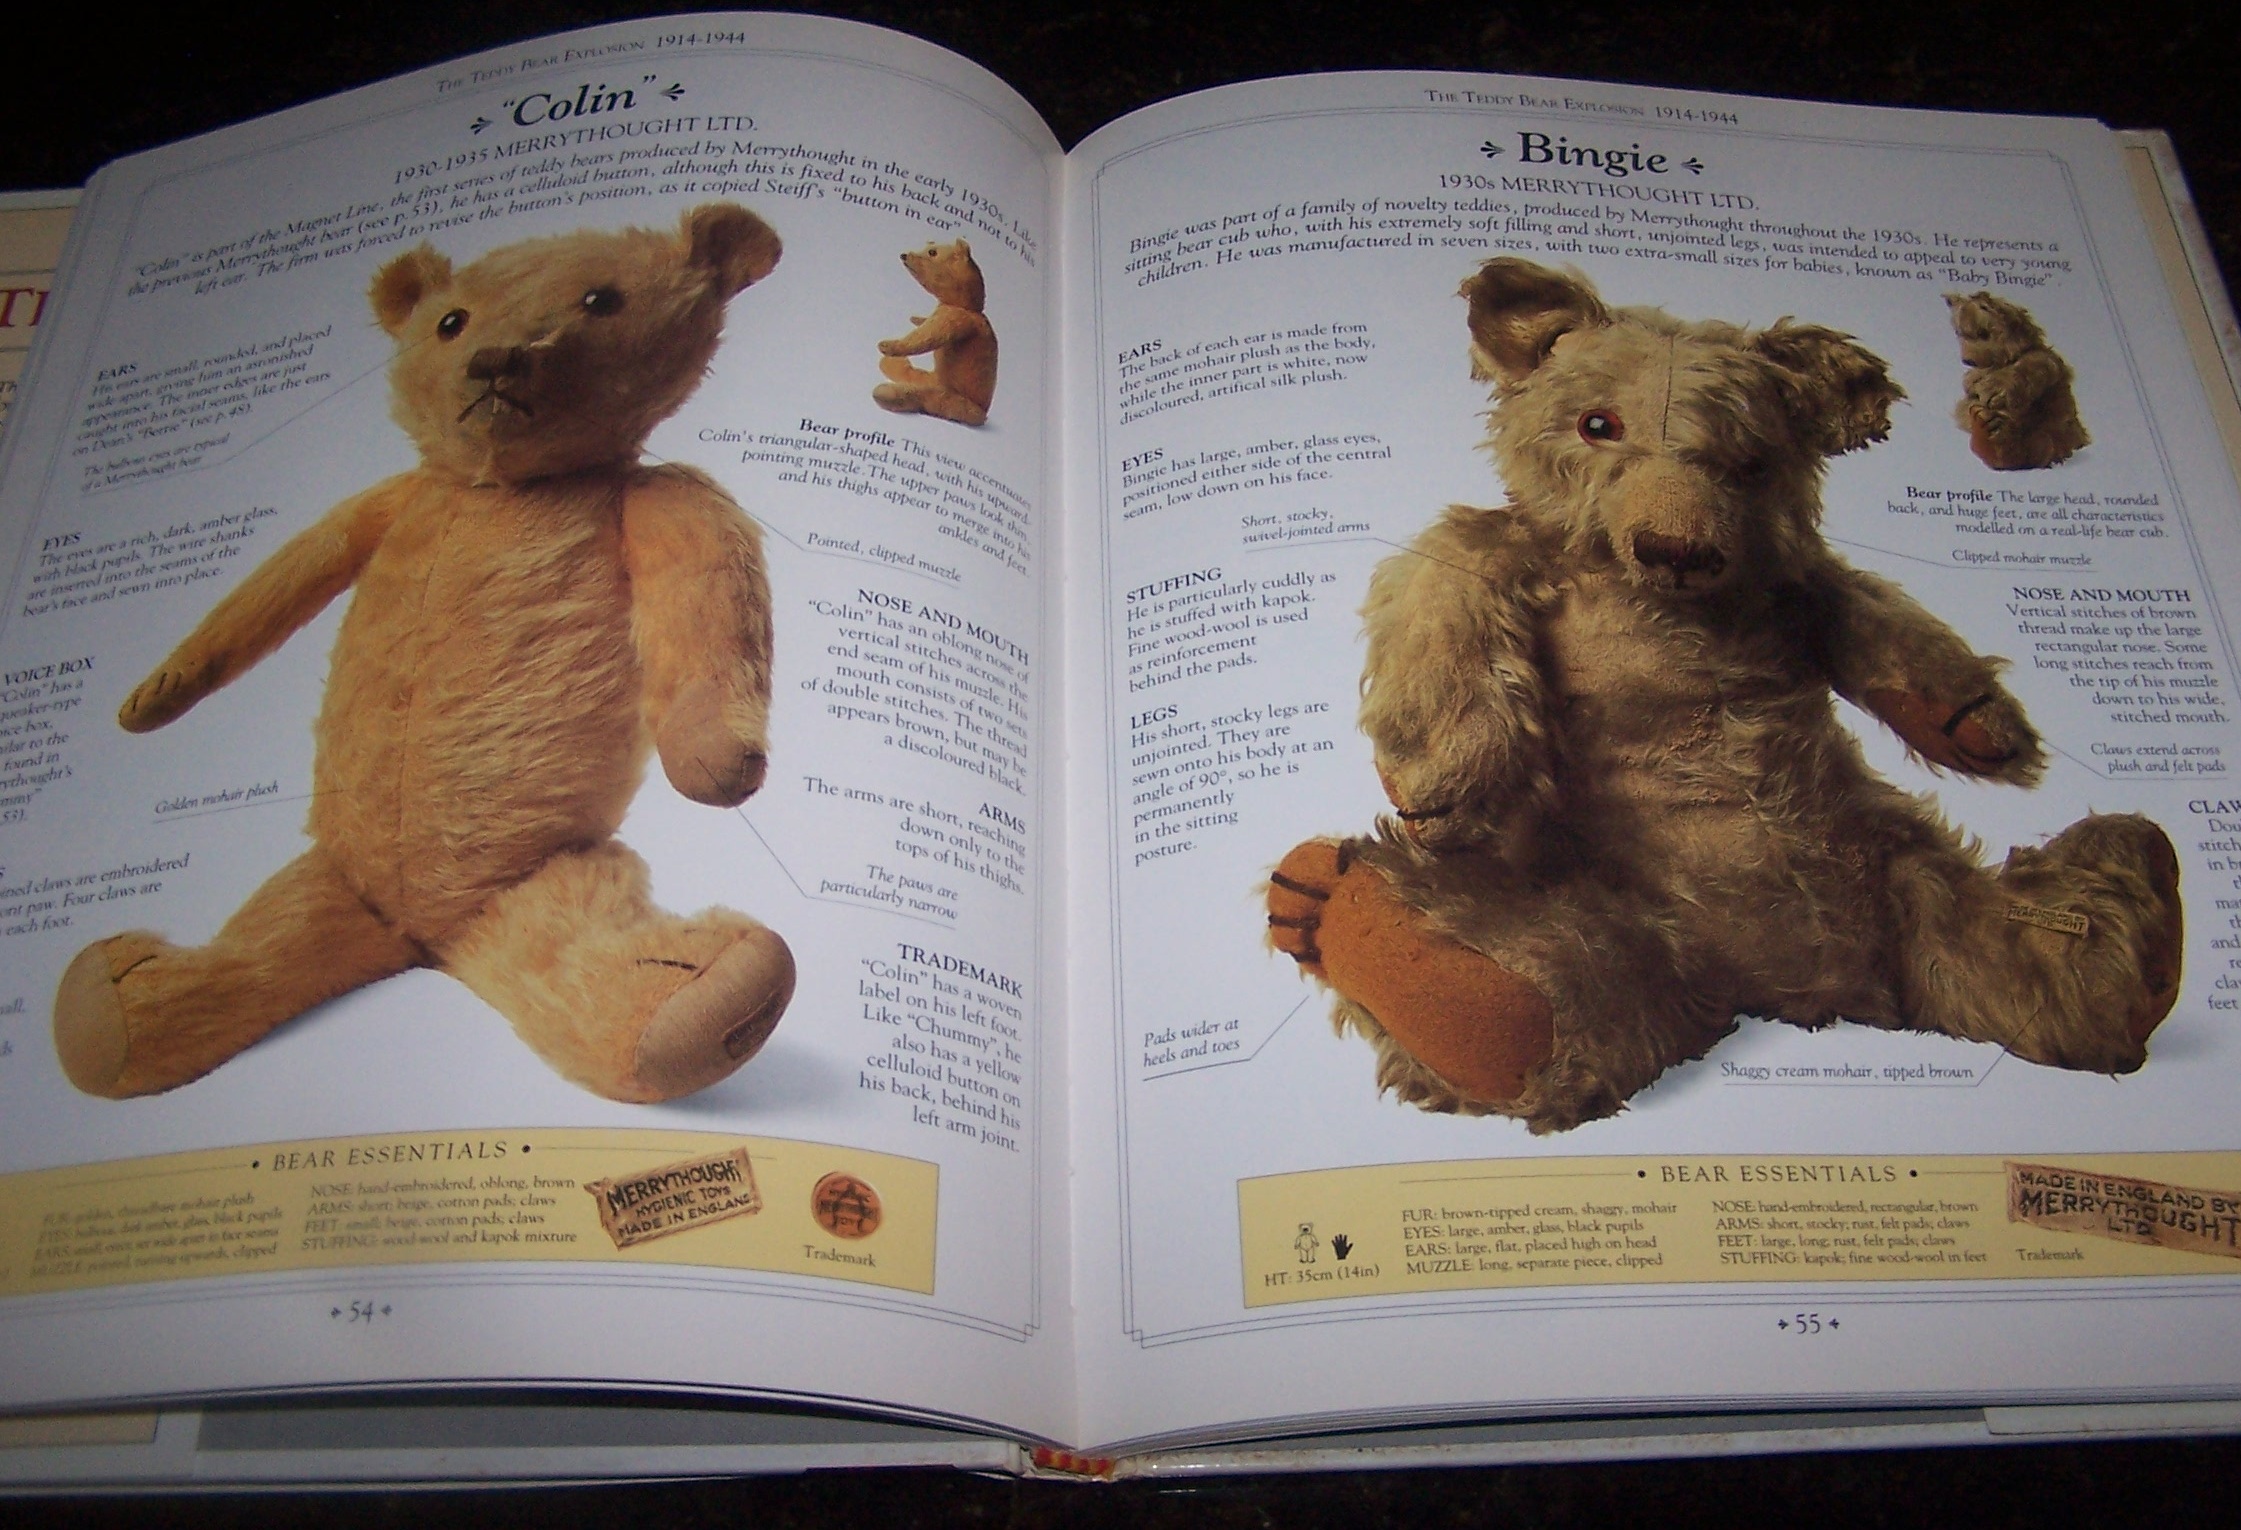 THE ULTIMATE TEDDY BEAR BOOK BY PAULINE COCKRILL